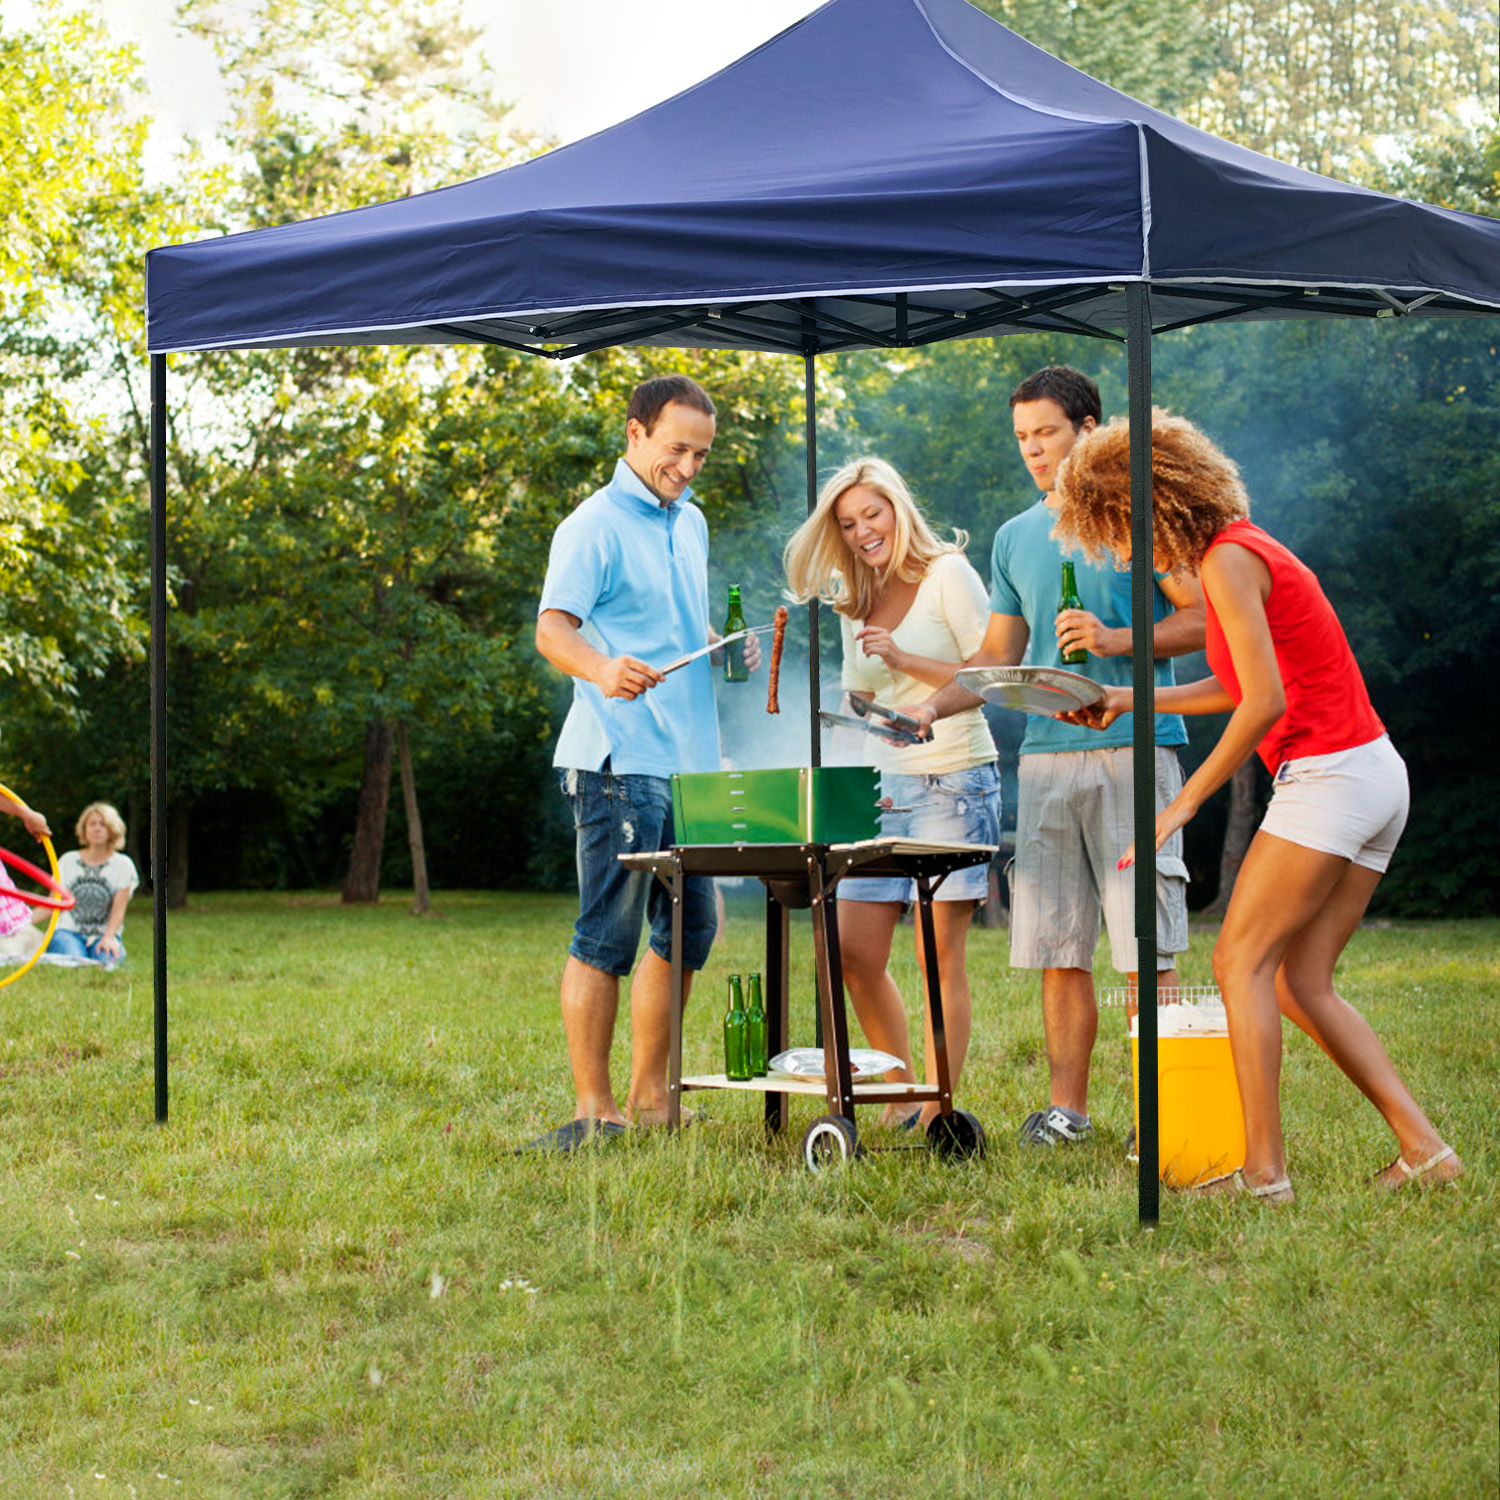 Pop up Canopy 10x10 Pop up Canopy Tent Folding Protable Ez up Canopy Sun Shade , 118.1 in, Blue - image 4 of 6